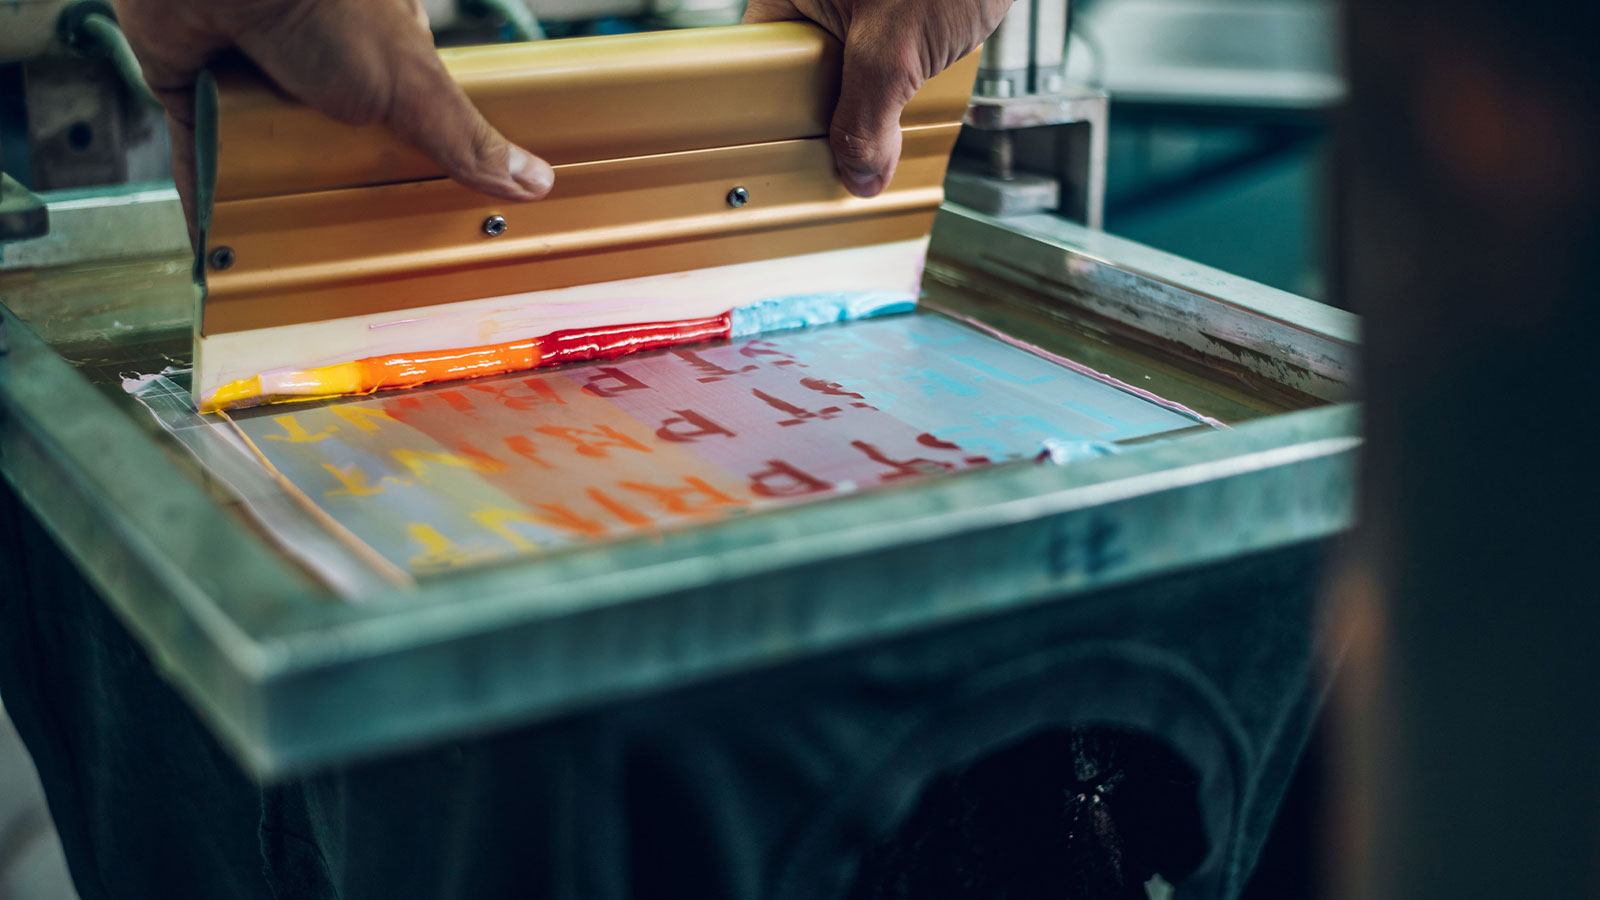 Screen Printing Services Rochester City, NY | Custom Apparel | Screen Printed Shirts, Hats, Hoodies, & More Near Rochester City